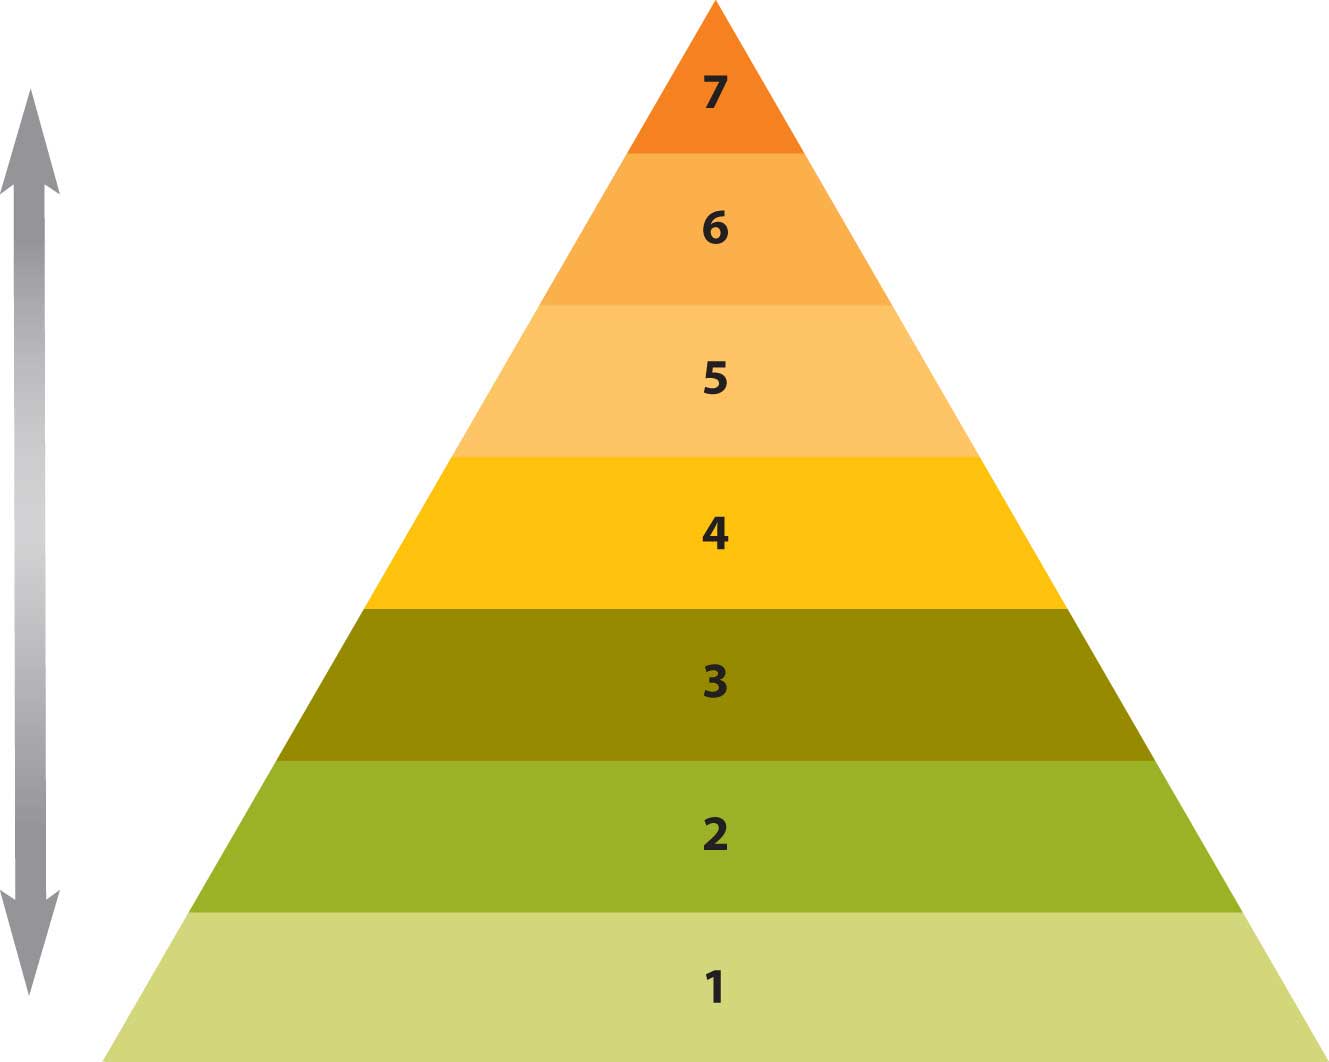 Diagram showing 7 layer pyramid of Maslow's Heirarchy of Needs